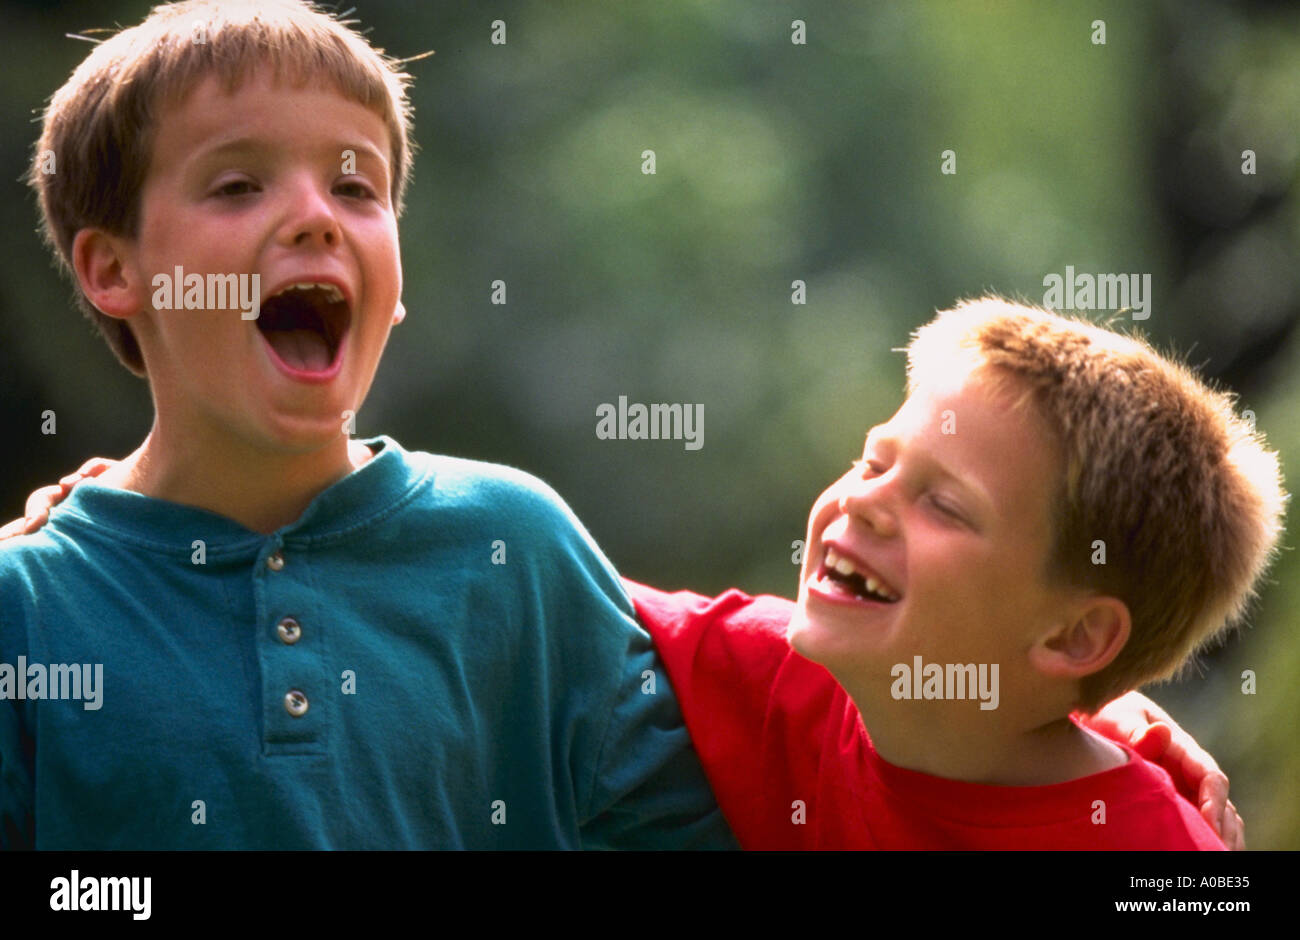 Two boys laughing and smiling together Stock Photo